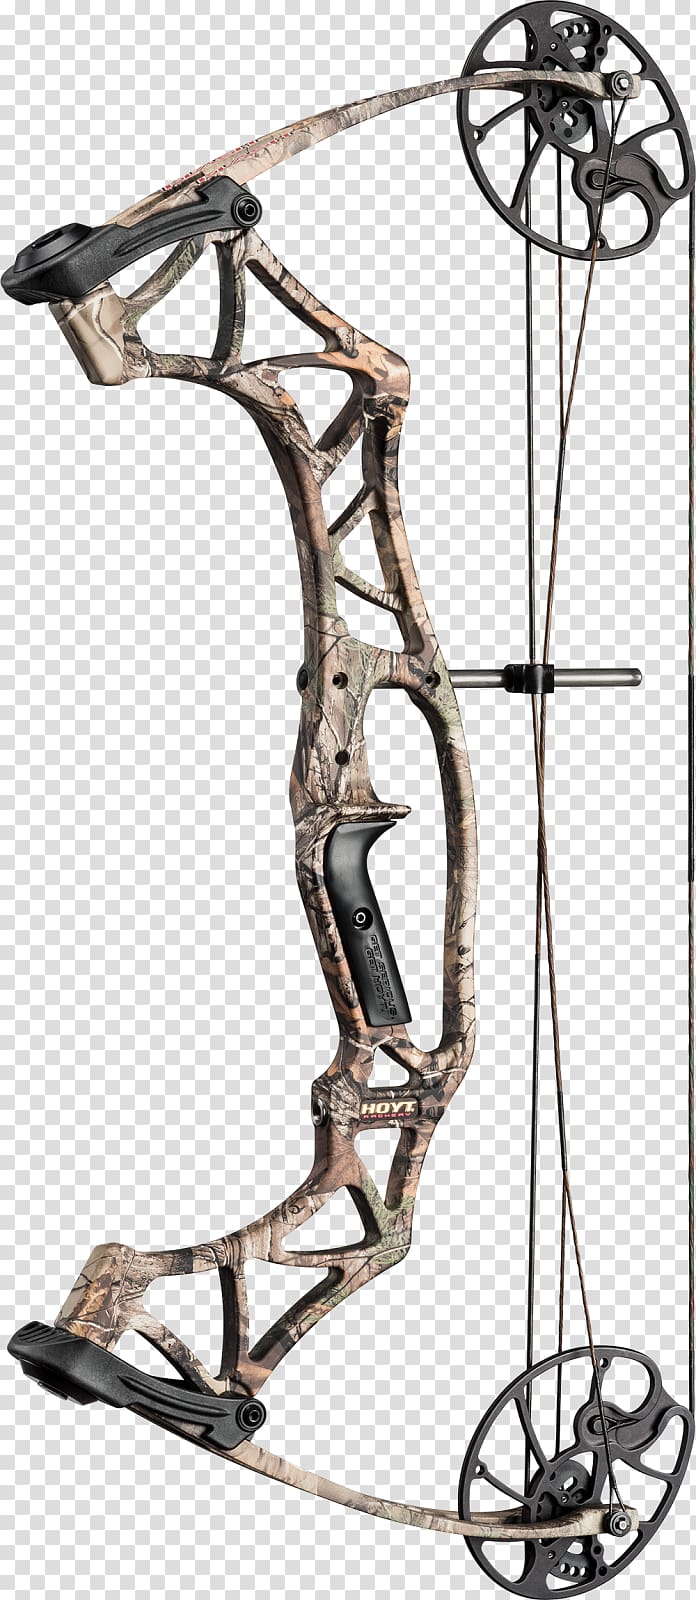 Bow and arrow Compound Bows Archery Bowhunting, Mounted Archery transparent background PNG clipart